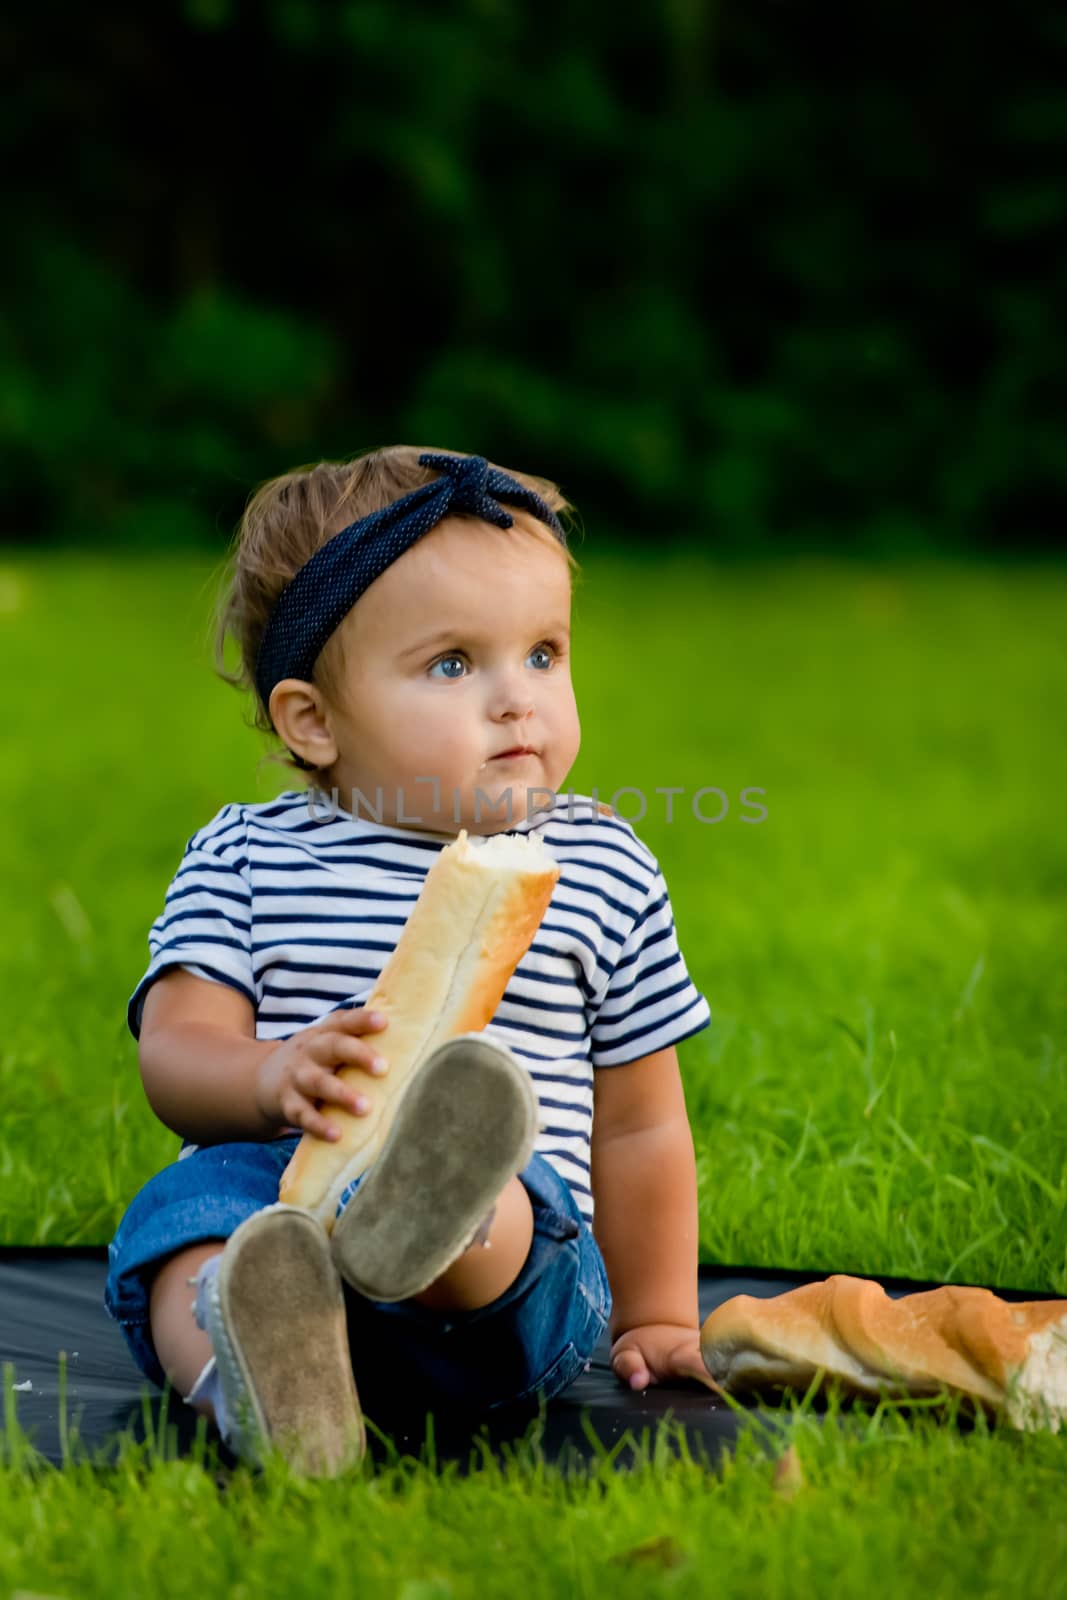 A little pretty baby girl sits on the lawn in the garden and holds a fresh baguette.